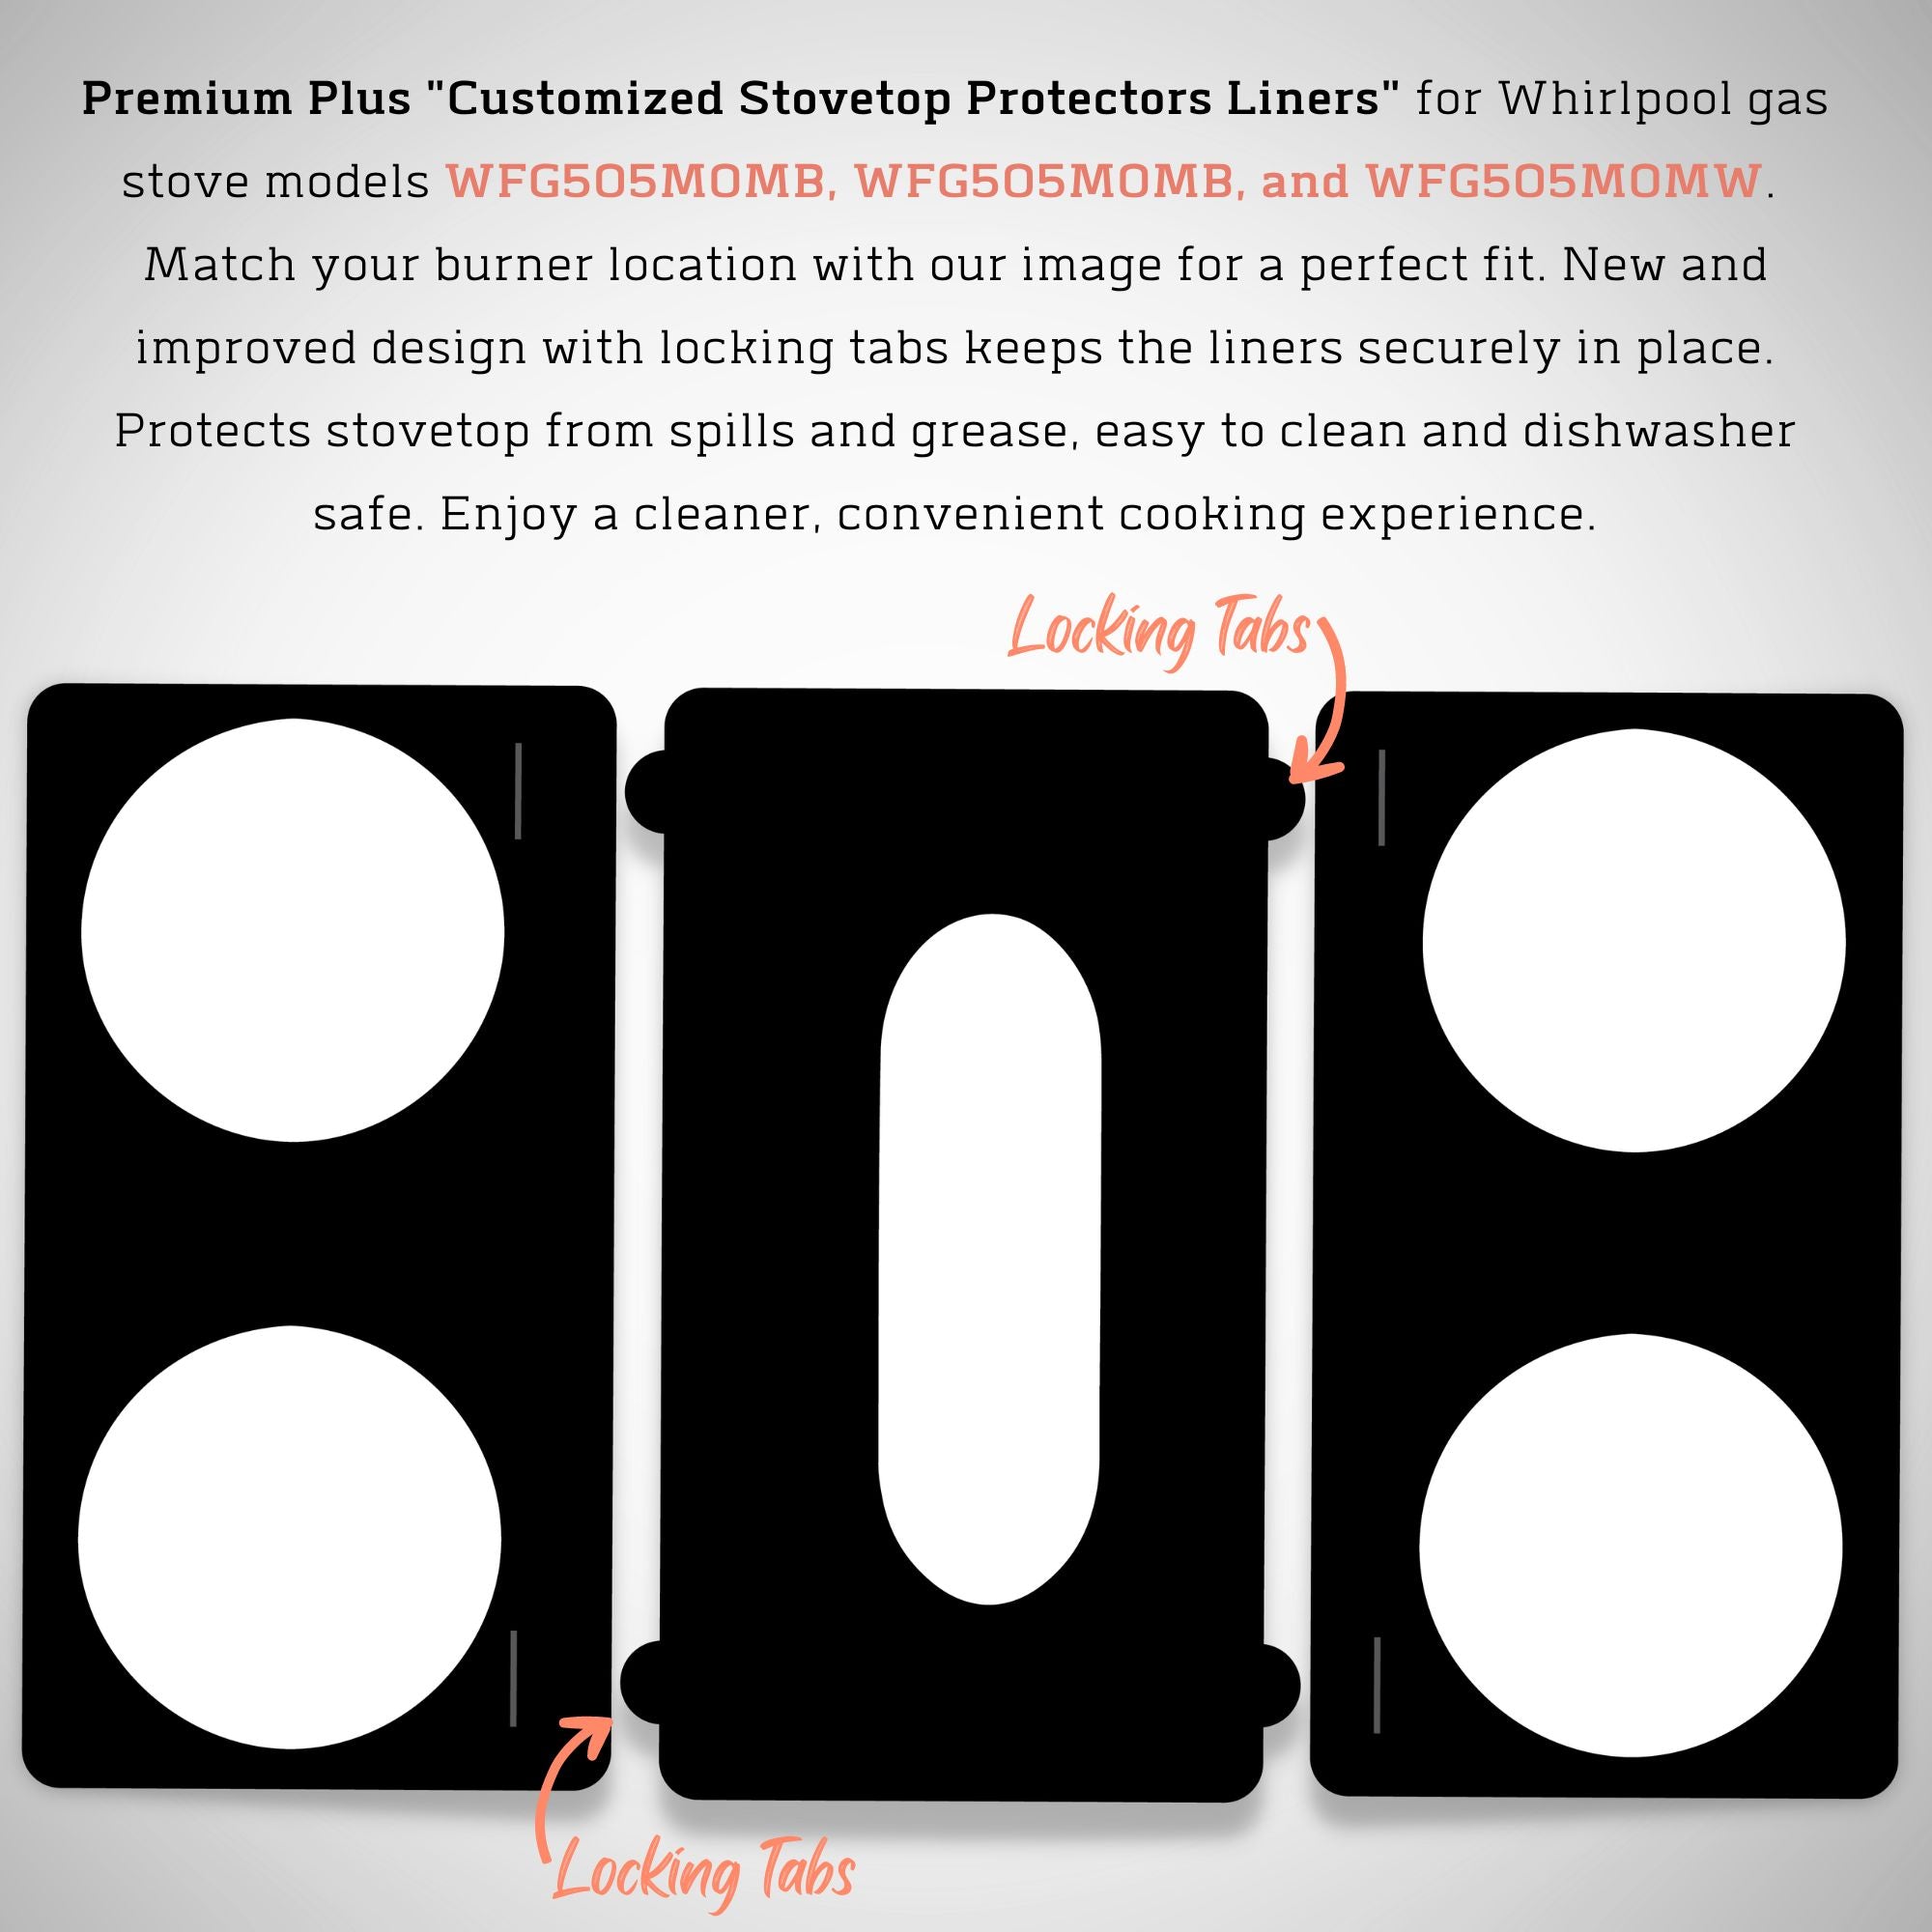 Whirlpool Stove Protector Liners - Stove Top Protector for Whirlpool G –  Premium Plus Inc